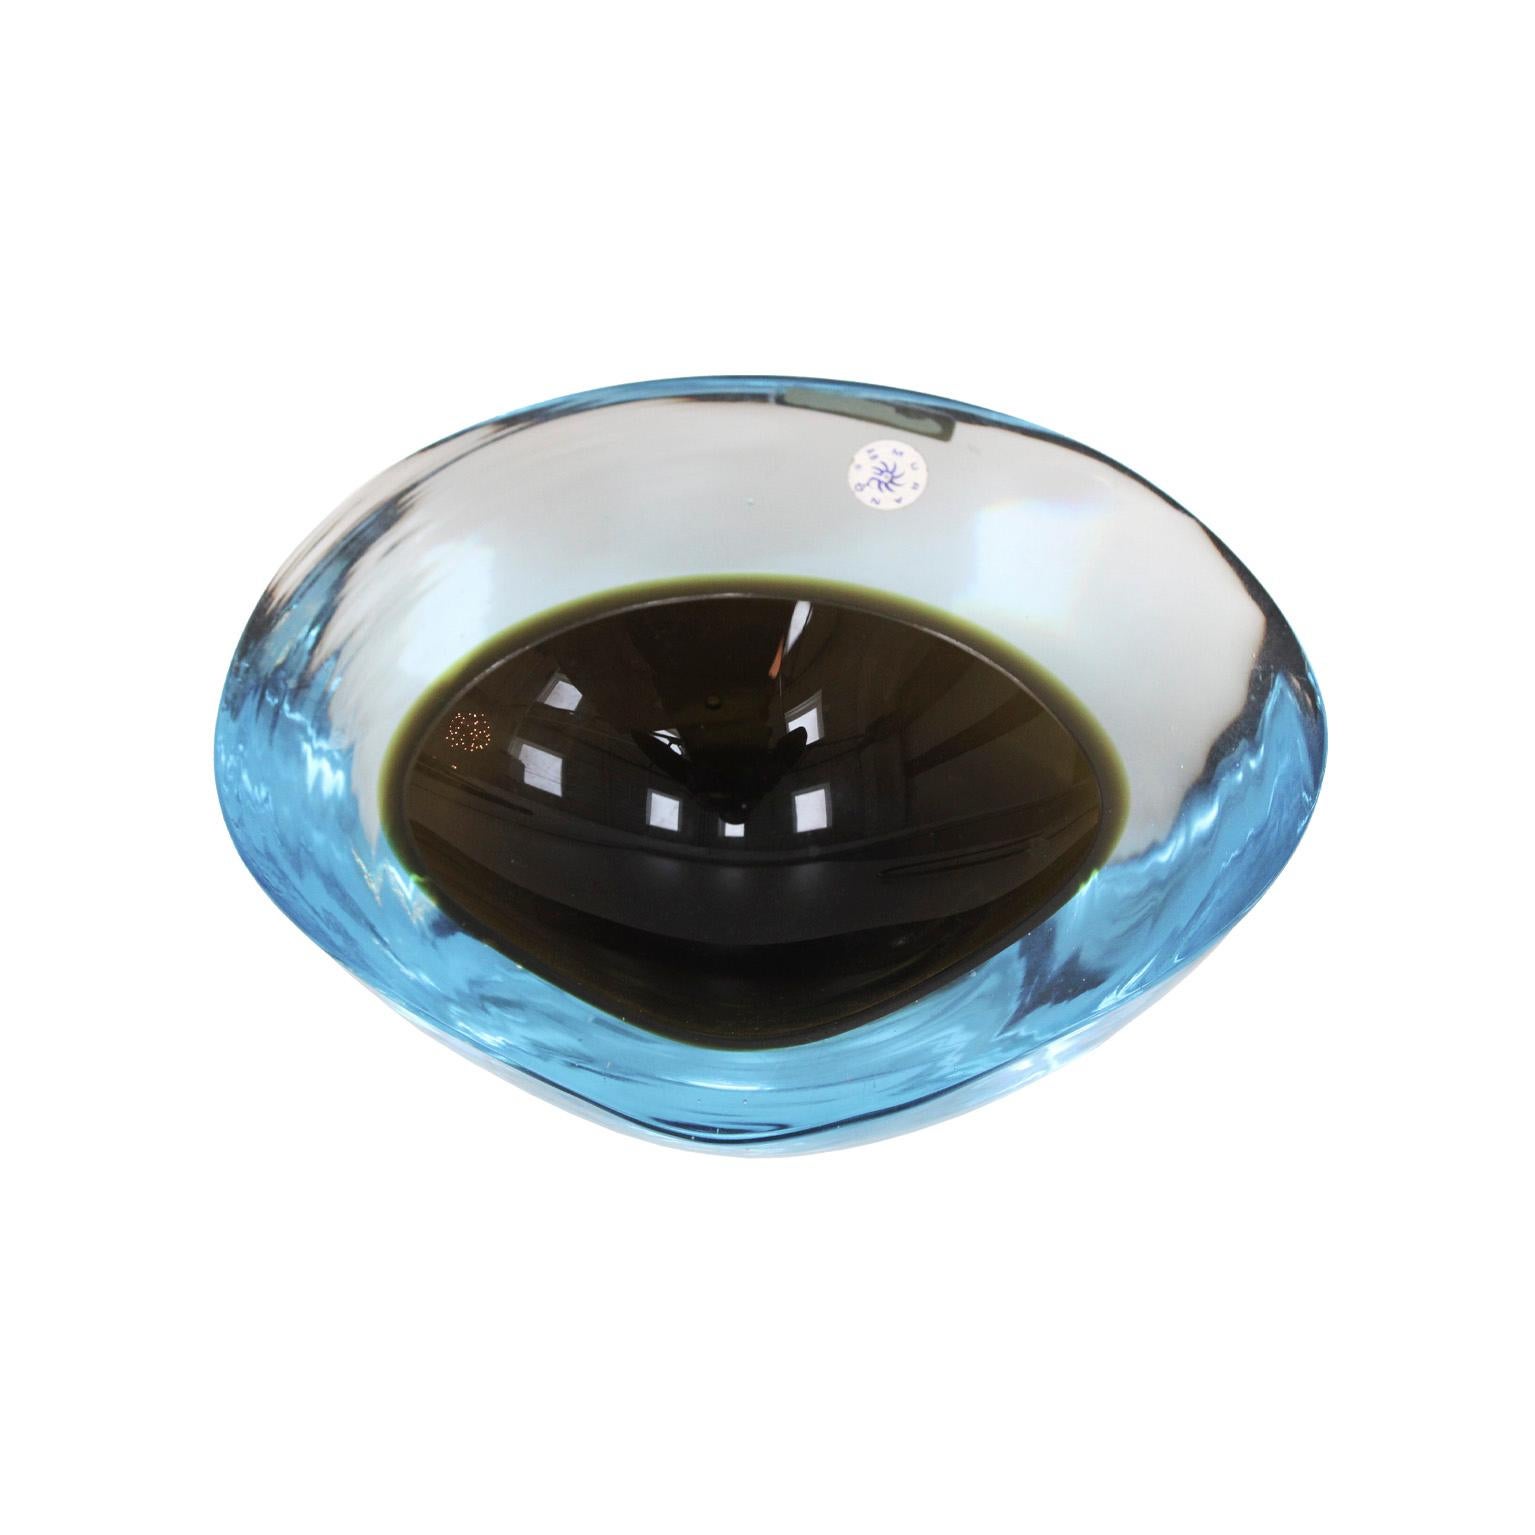 Mid-century Modern Glass Bowl. Attributed to Flavio Poli for Seguso. Italy, 50s.
In sommerso glass, the black body is submerged in a very slightly turquoise mass. (Color variant Nero – Turchese)

Every item LA Studio offers is checked by our team of